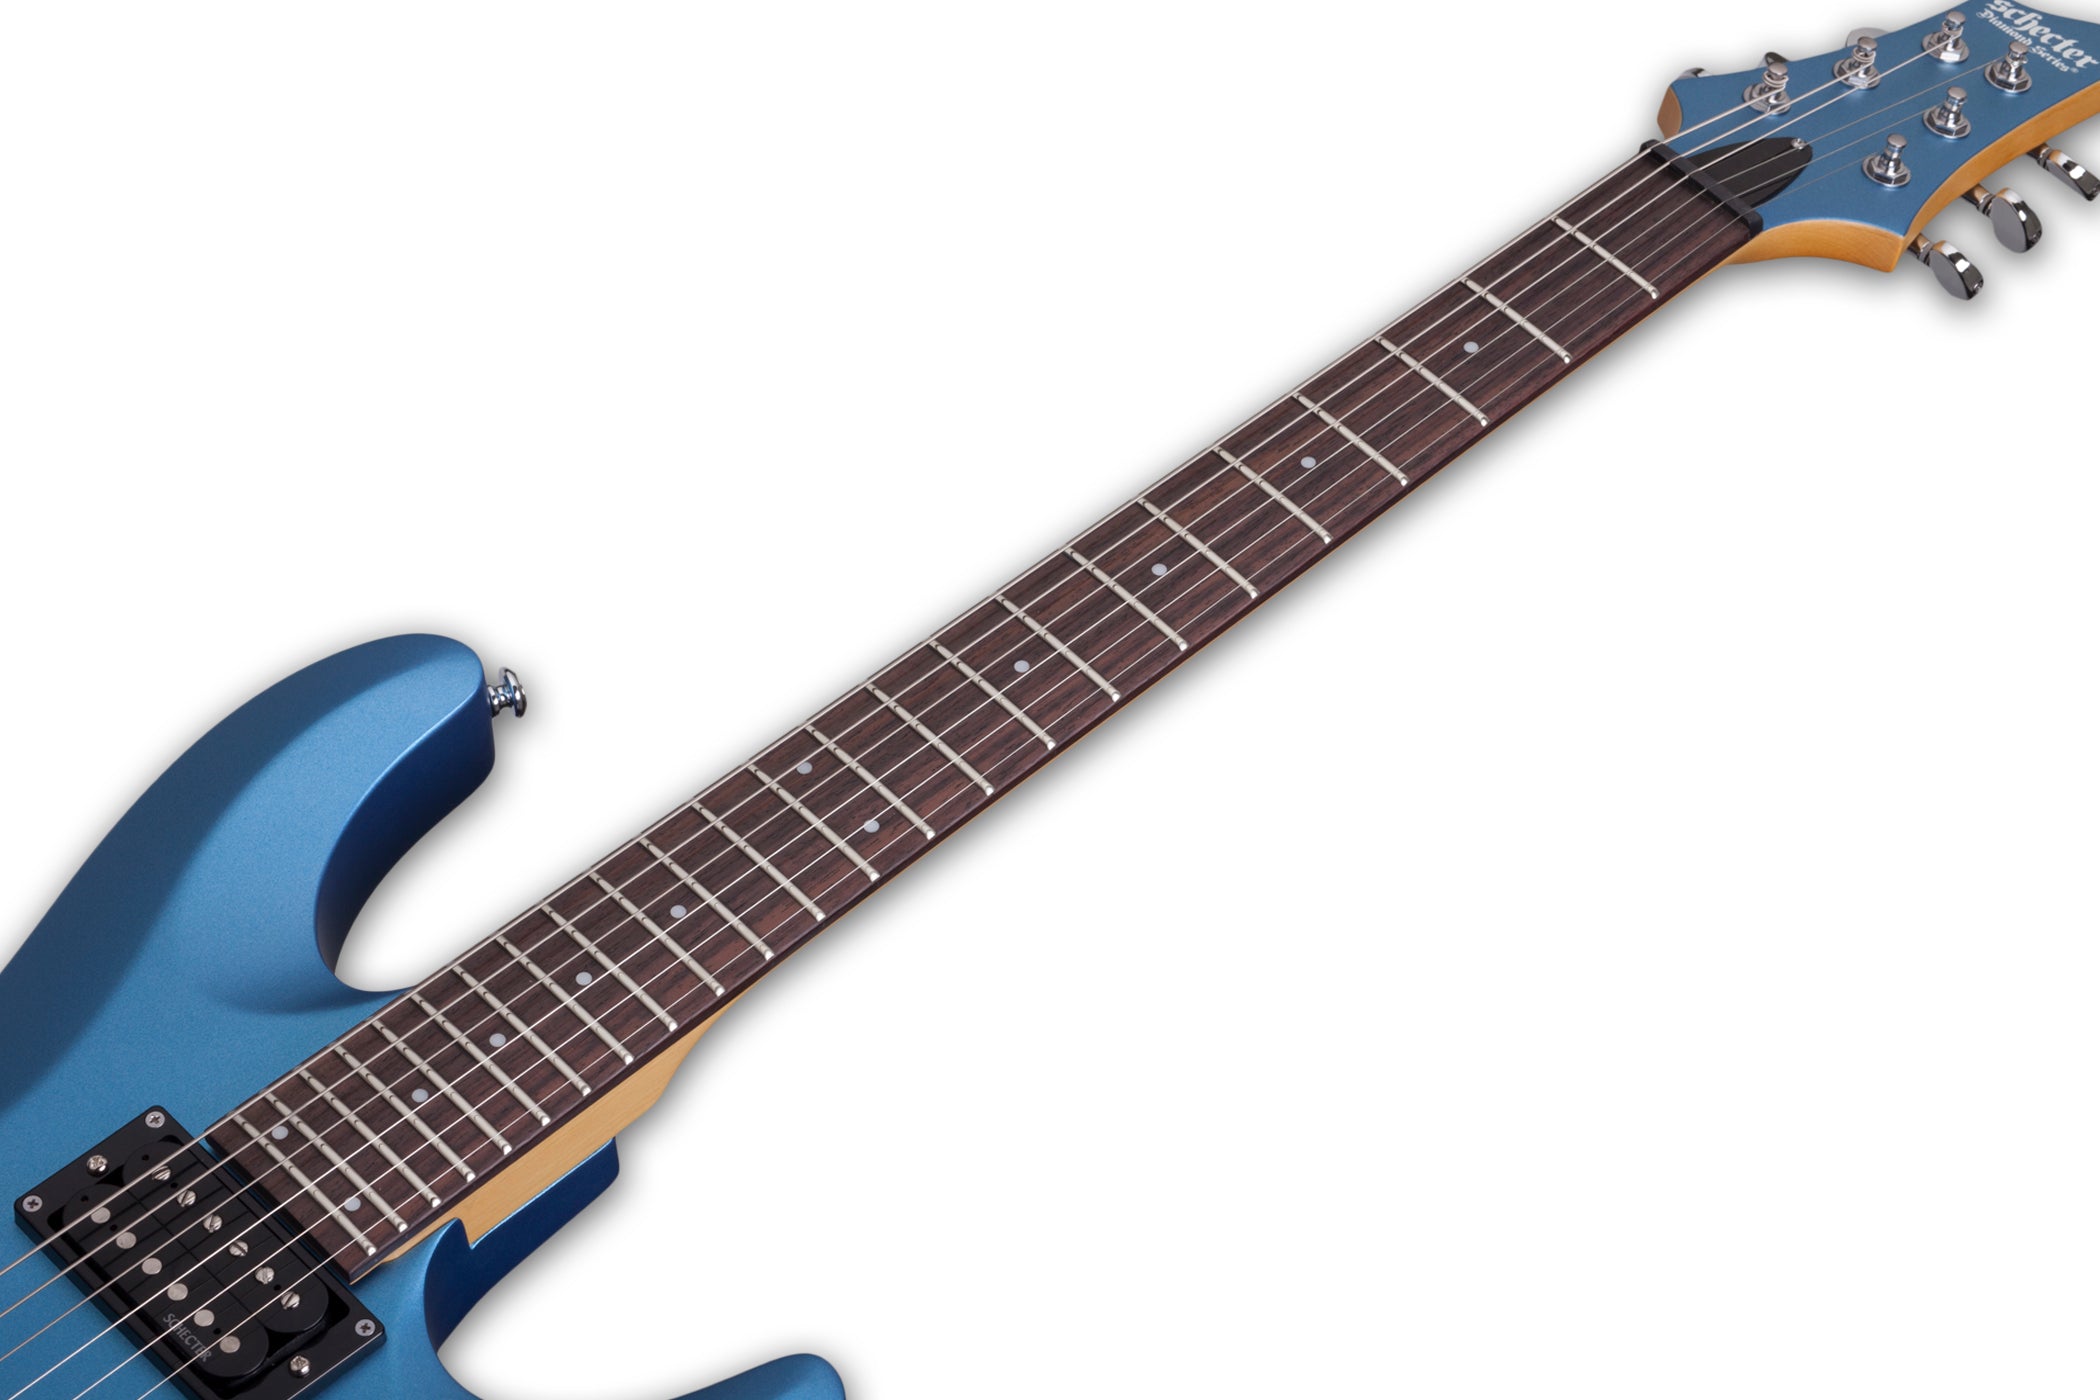 SCHECTER C-6 DELUXE ELECTRIC GUITAR- SATIN METALLIC LIGHT BLUE (431) MADE IN INDONESIA, SCHECTER, ELECTRIC GUITAR, schecter-electric-guitar-c-6-deluxe-sm, ZOSO MUSIC SDN BHD